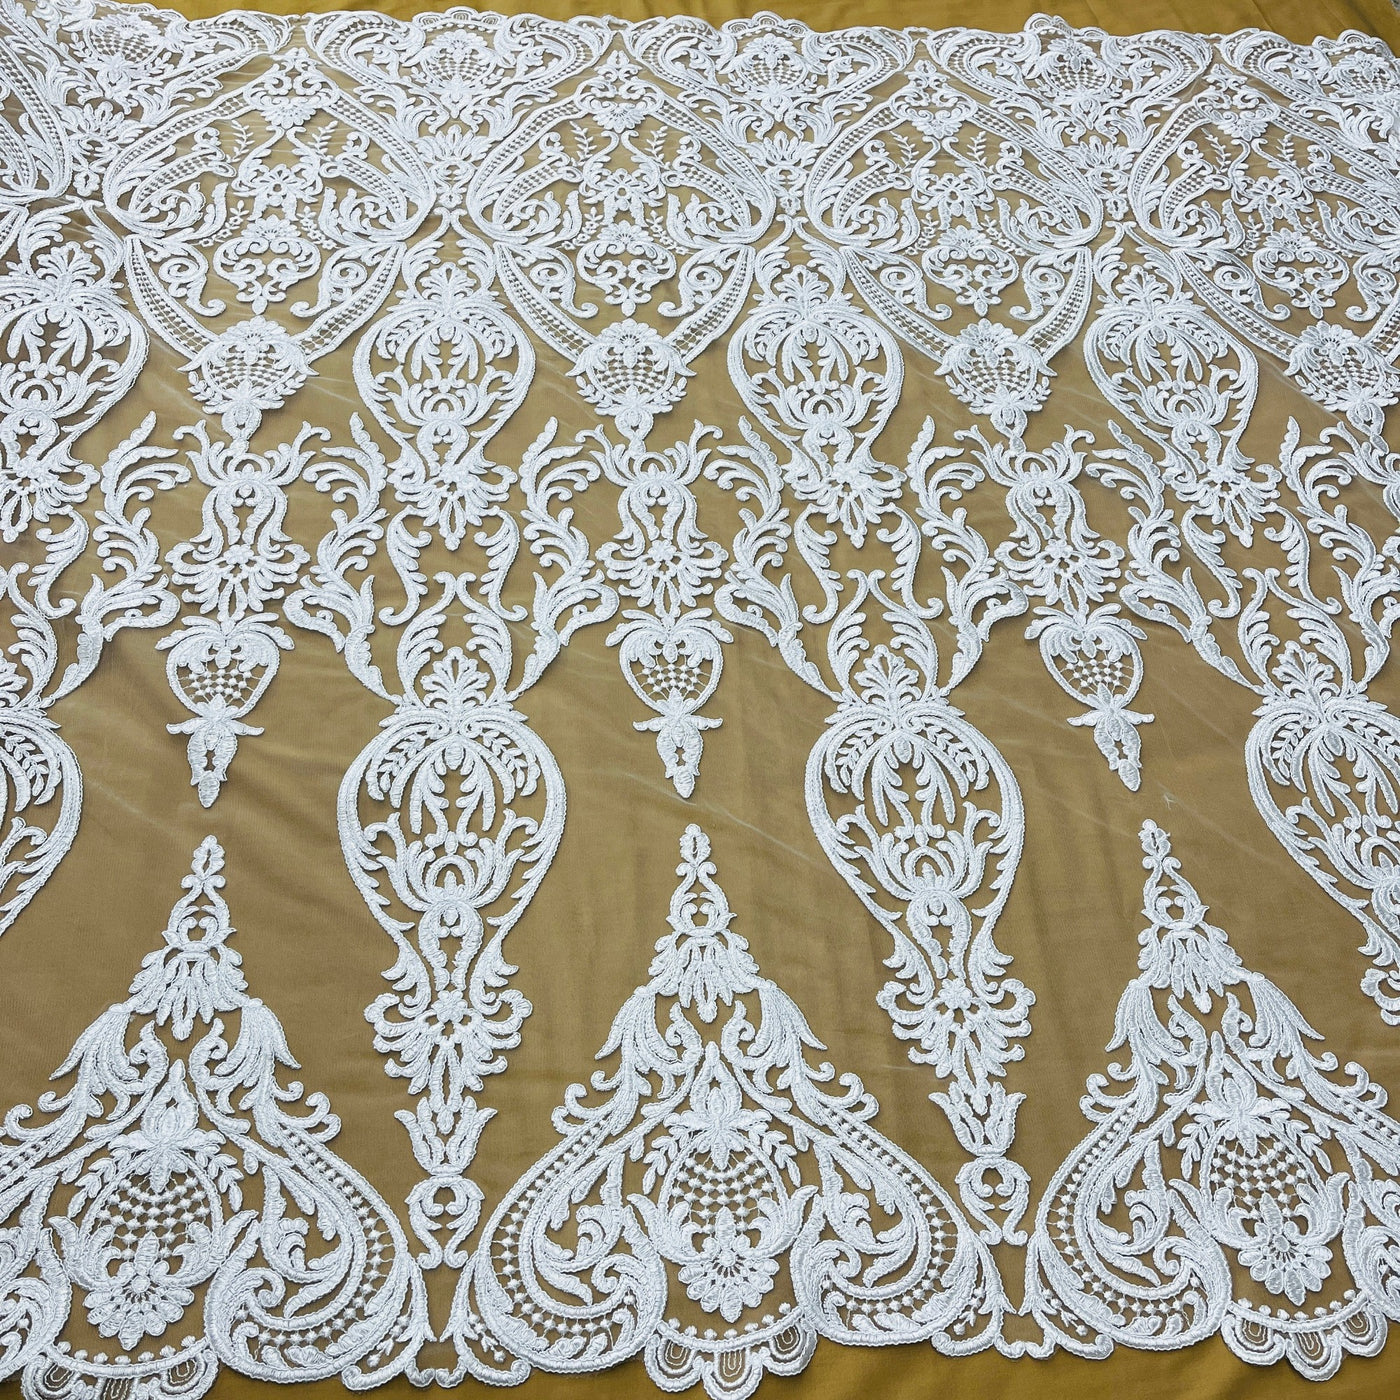 Corded Bridal Lace Fabric Embroidered on 100% Polyester Net Mesh | Lace USA